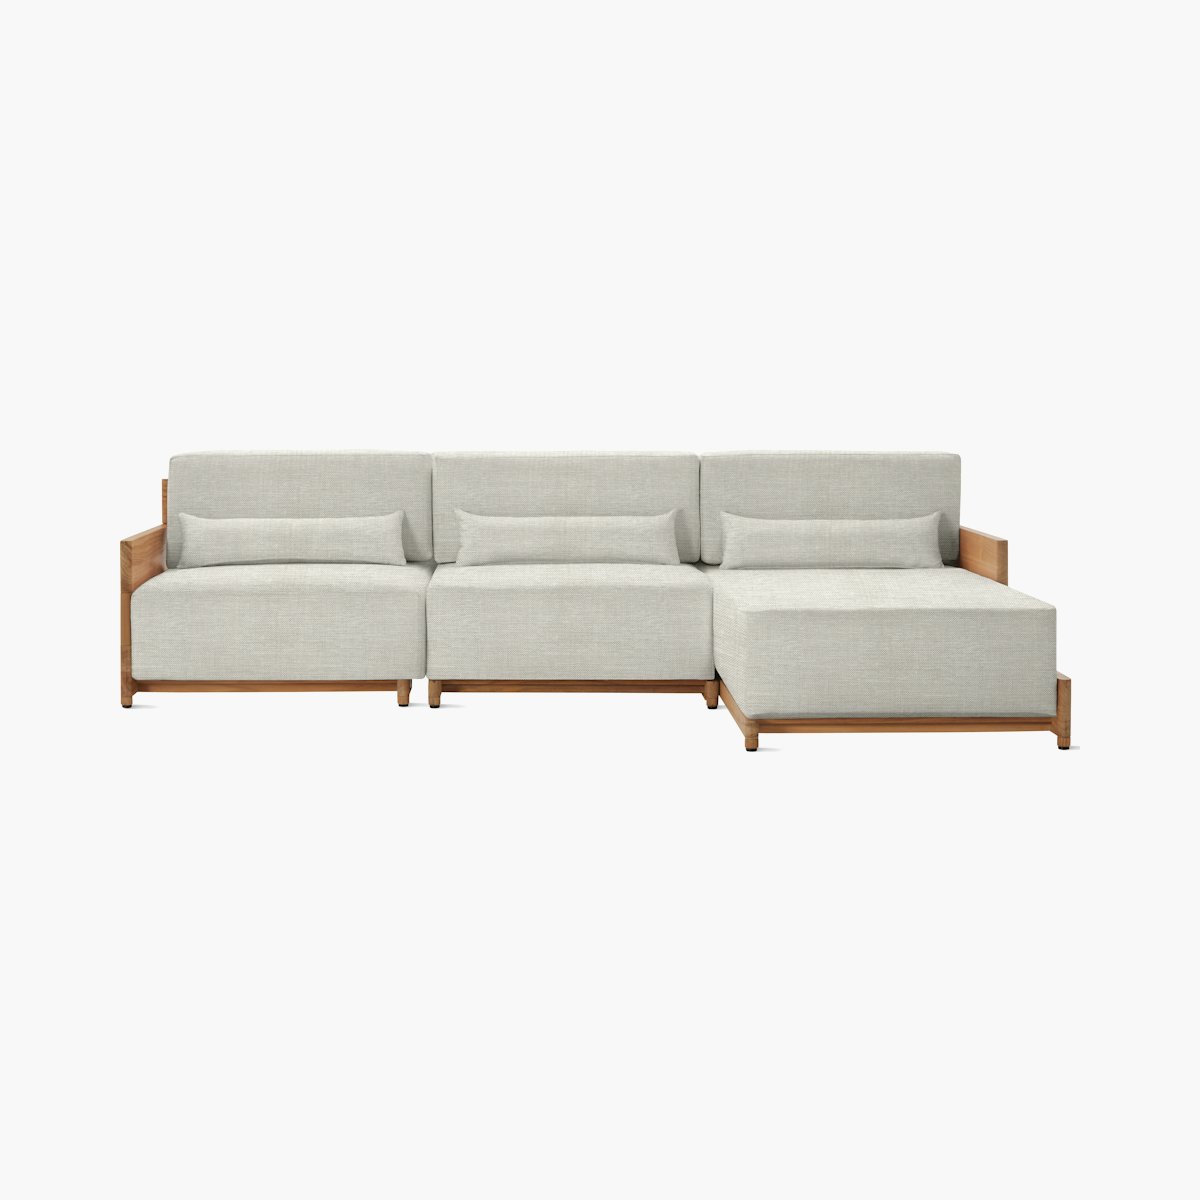 Esplanade 3 Piece Chaise Sectional